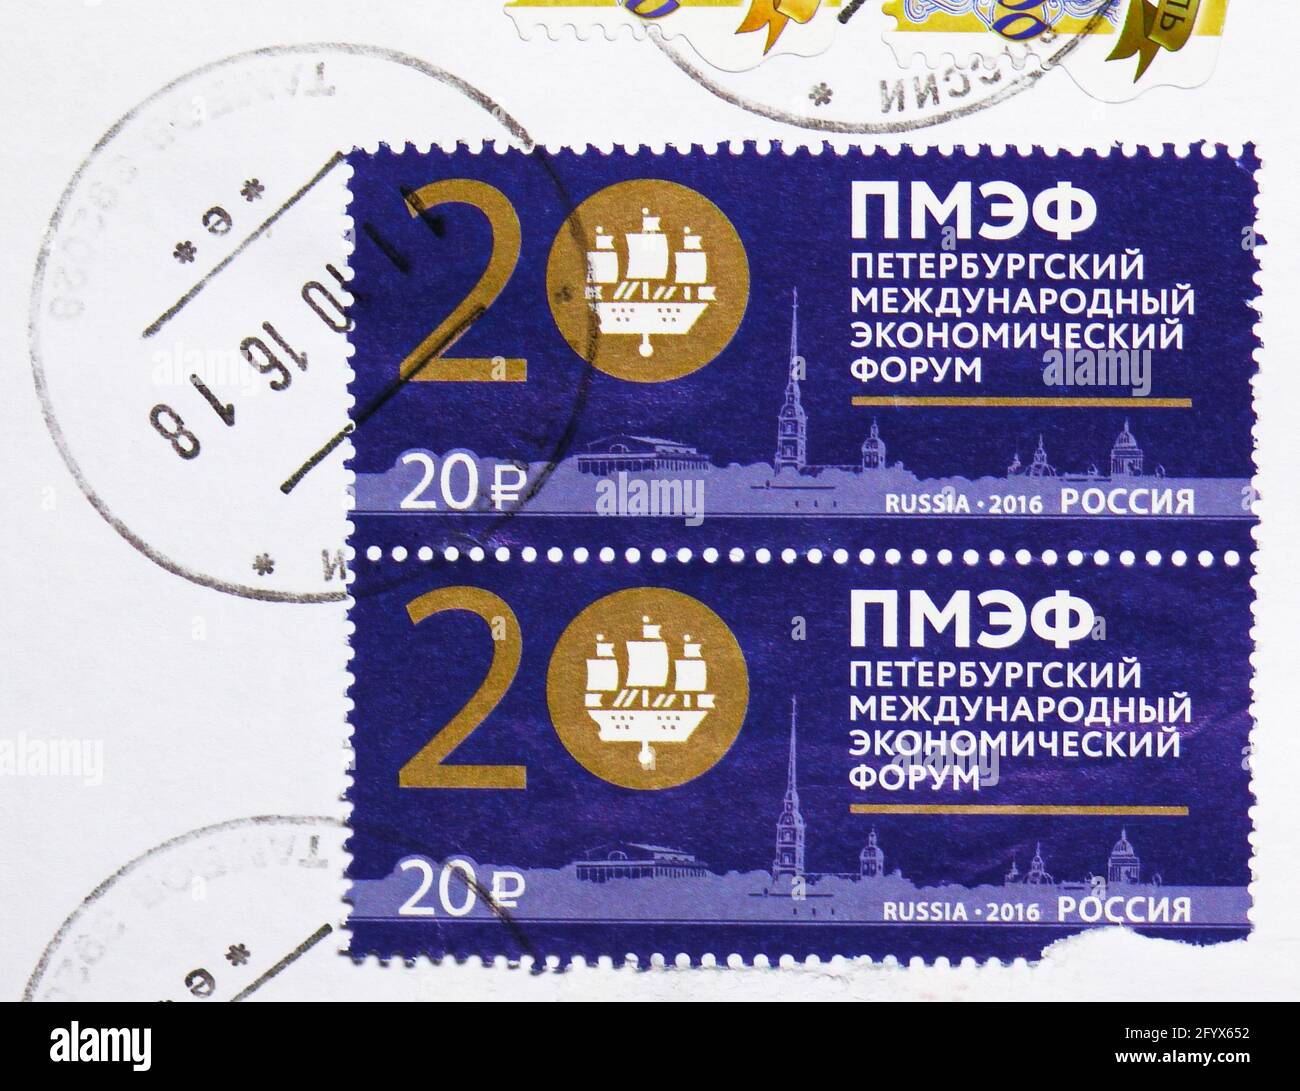 MOSCOW, RUSSIA - FEBRUARY 20, 2020: Two postage stamps printed in Russia with stamp of Tambov town Post office devoted to Petersburg International Eco Stock Photo